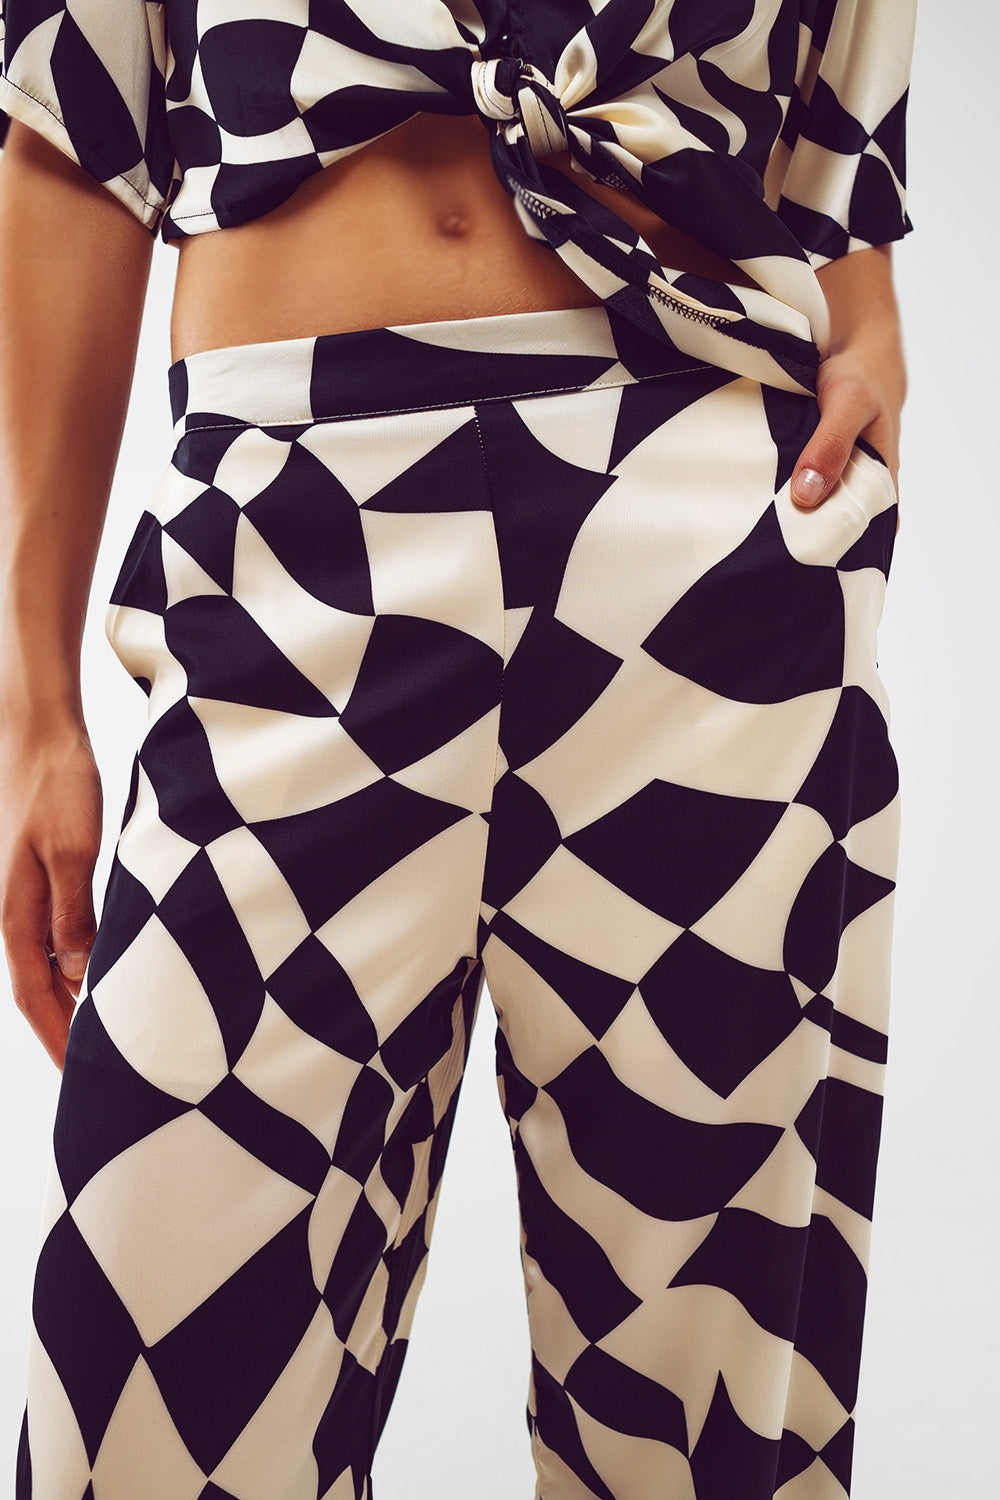 Straight Pants With Bauhaus Abstract Black and White Print - Szua Store